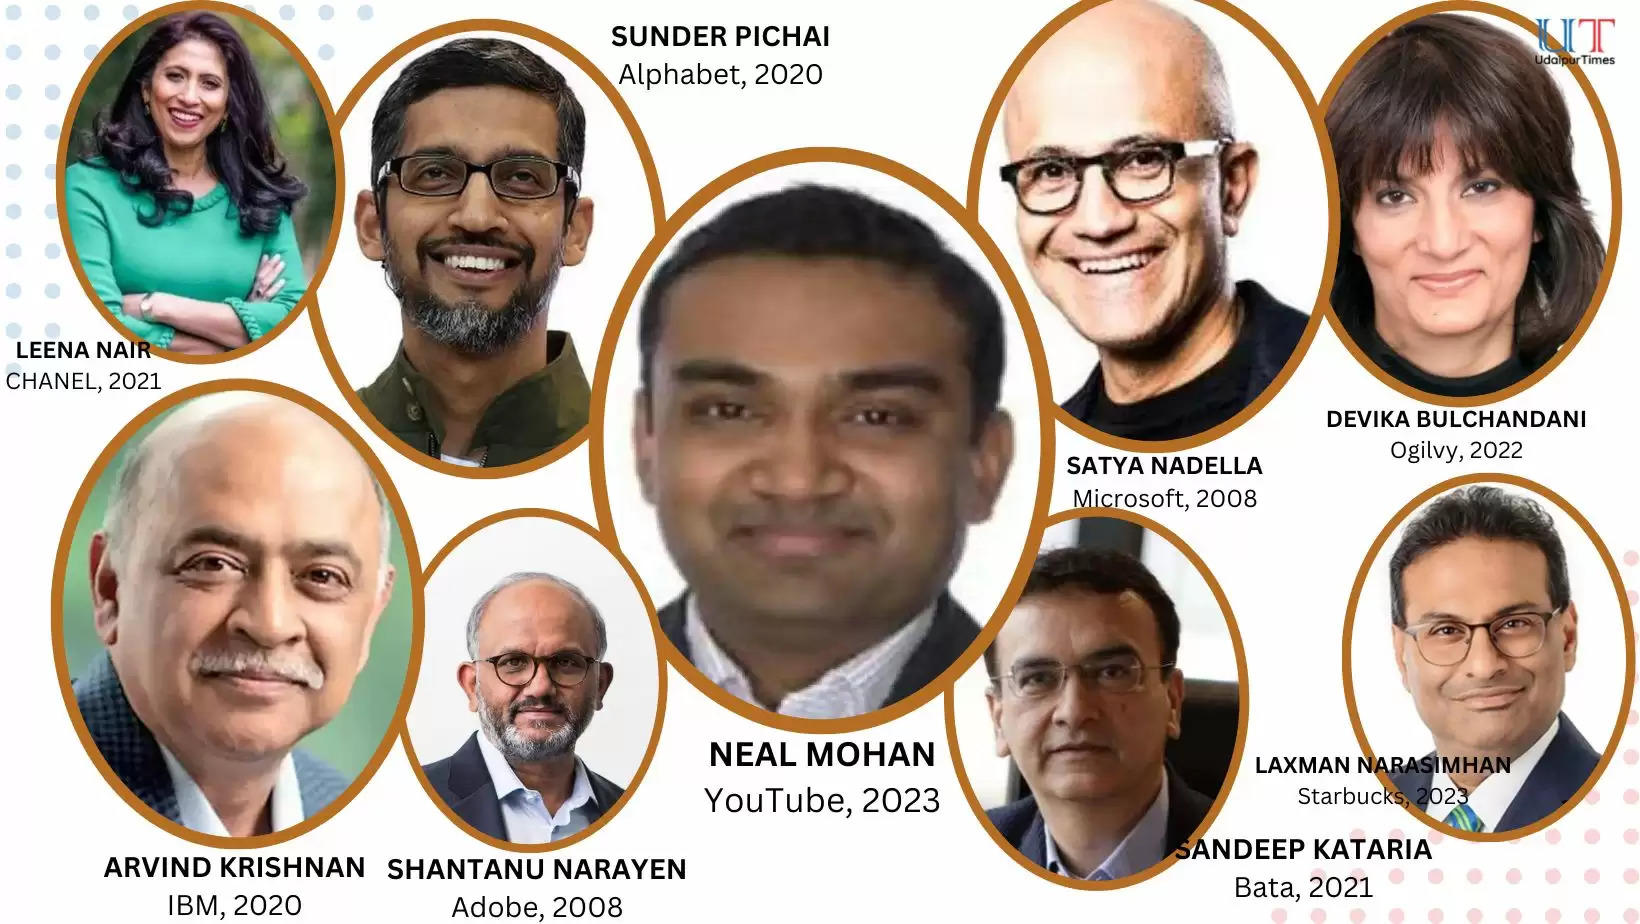 Neal Mohan YouTube Stanford Indian Origin, Who are the Indian Origin global CEOs of leading multinationals